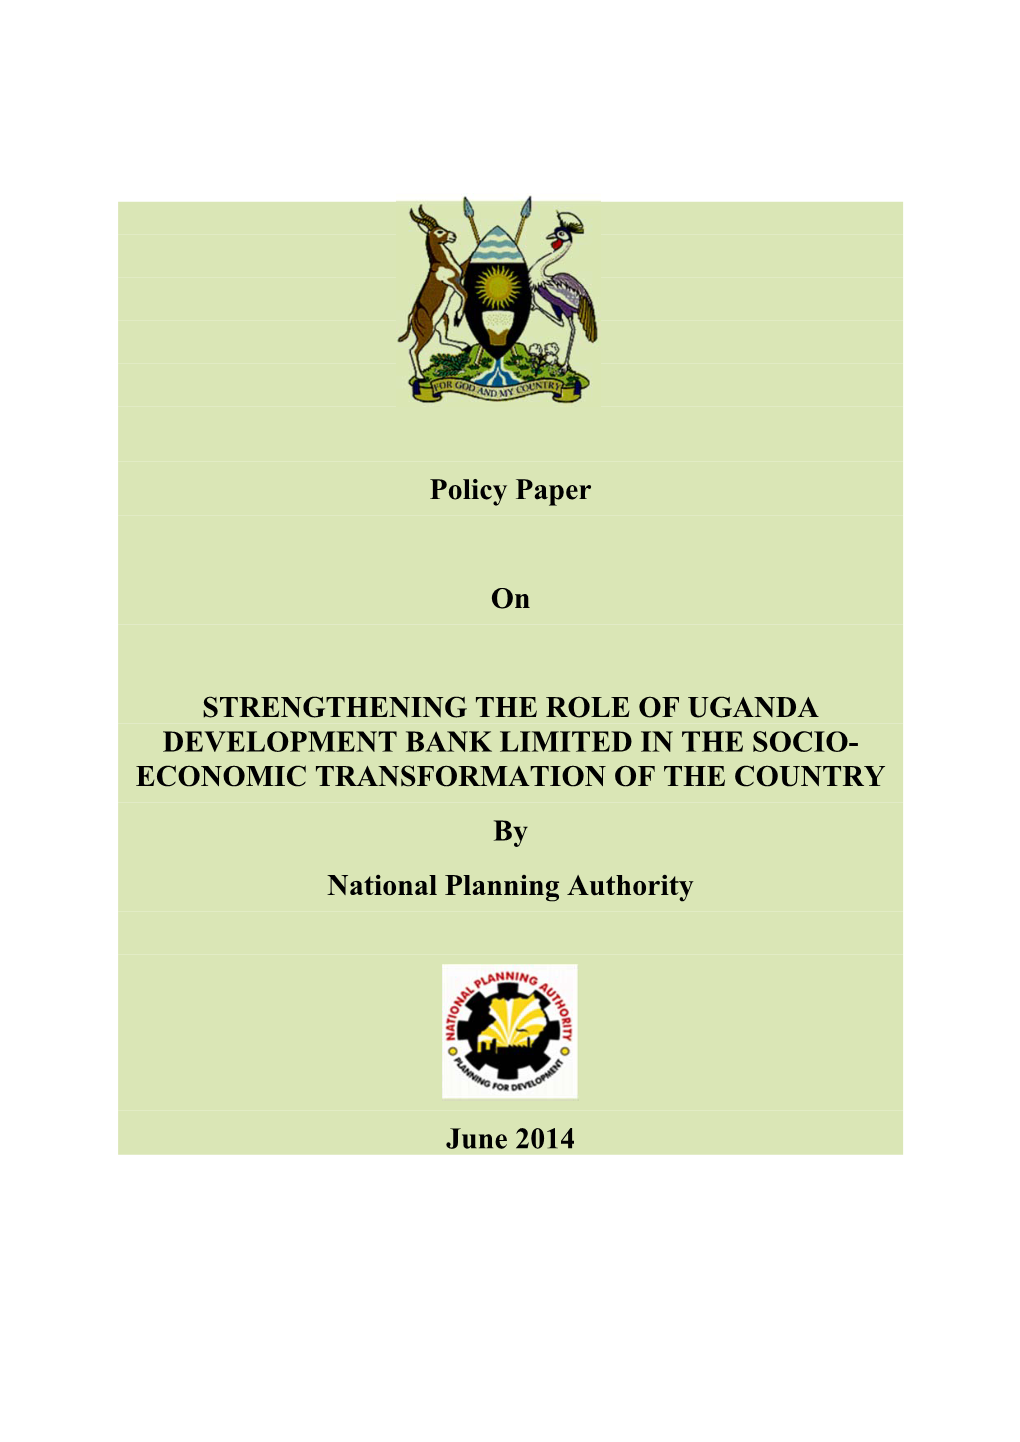 Policy Paper on STRENGTHENING the ROLE of UGANDA